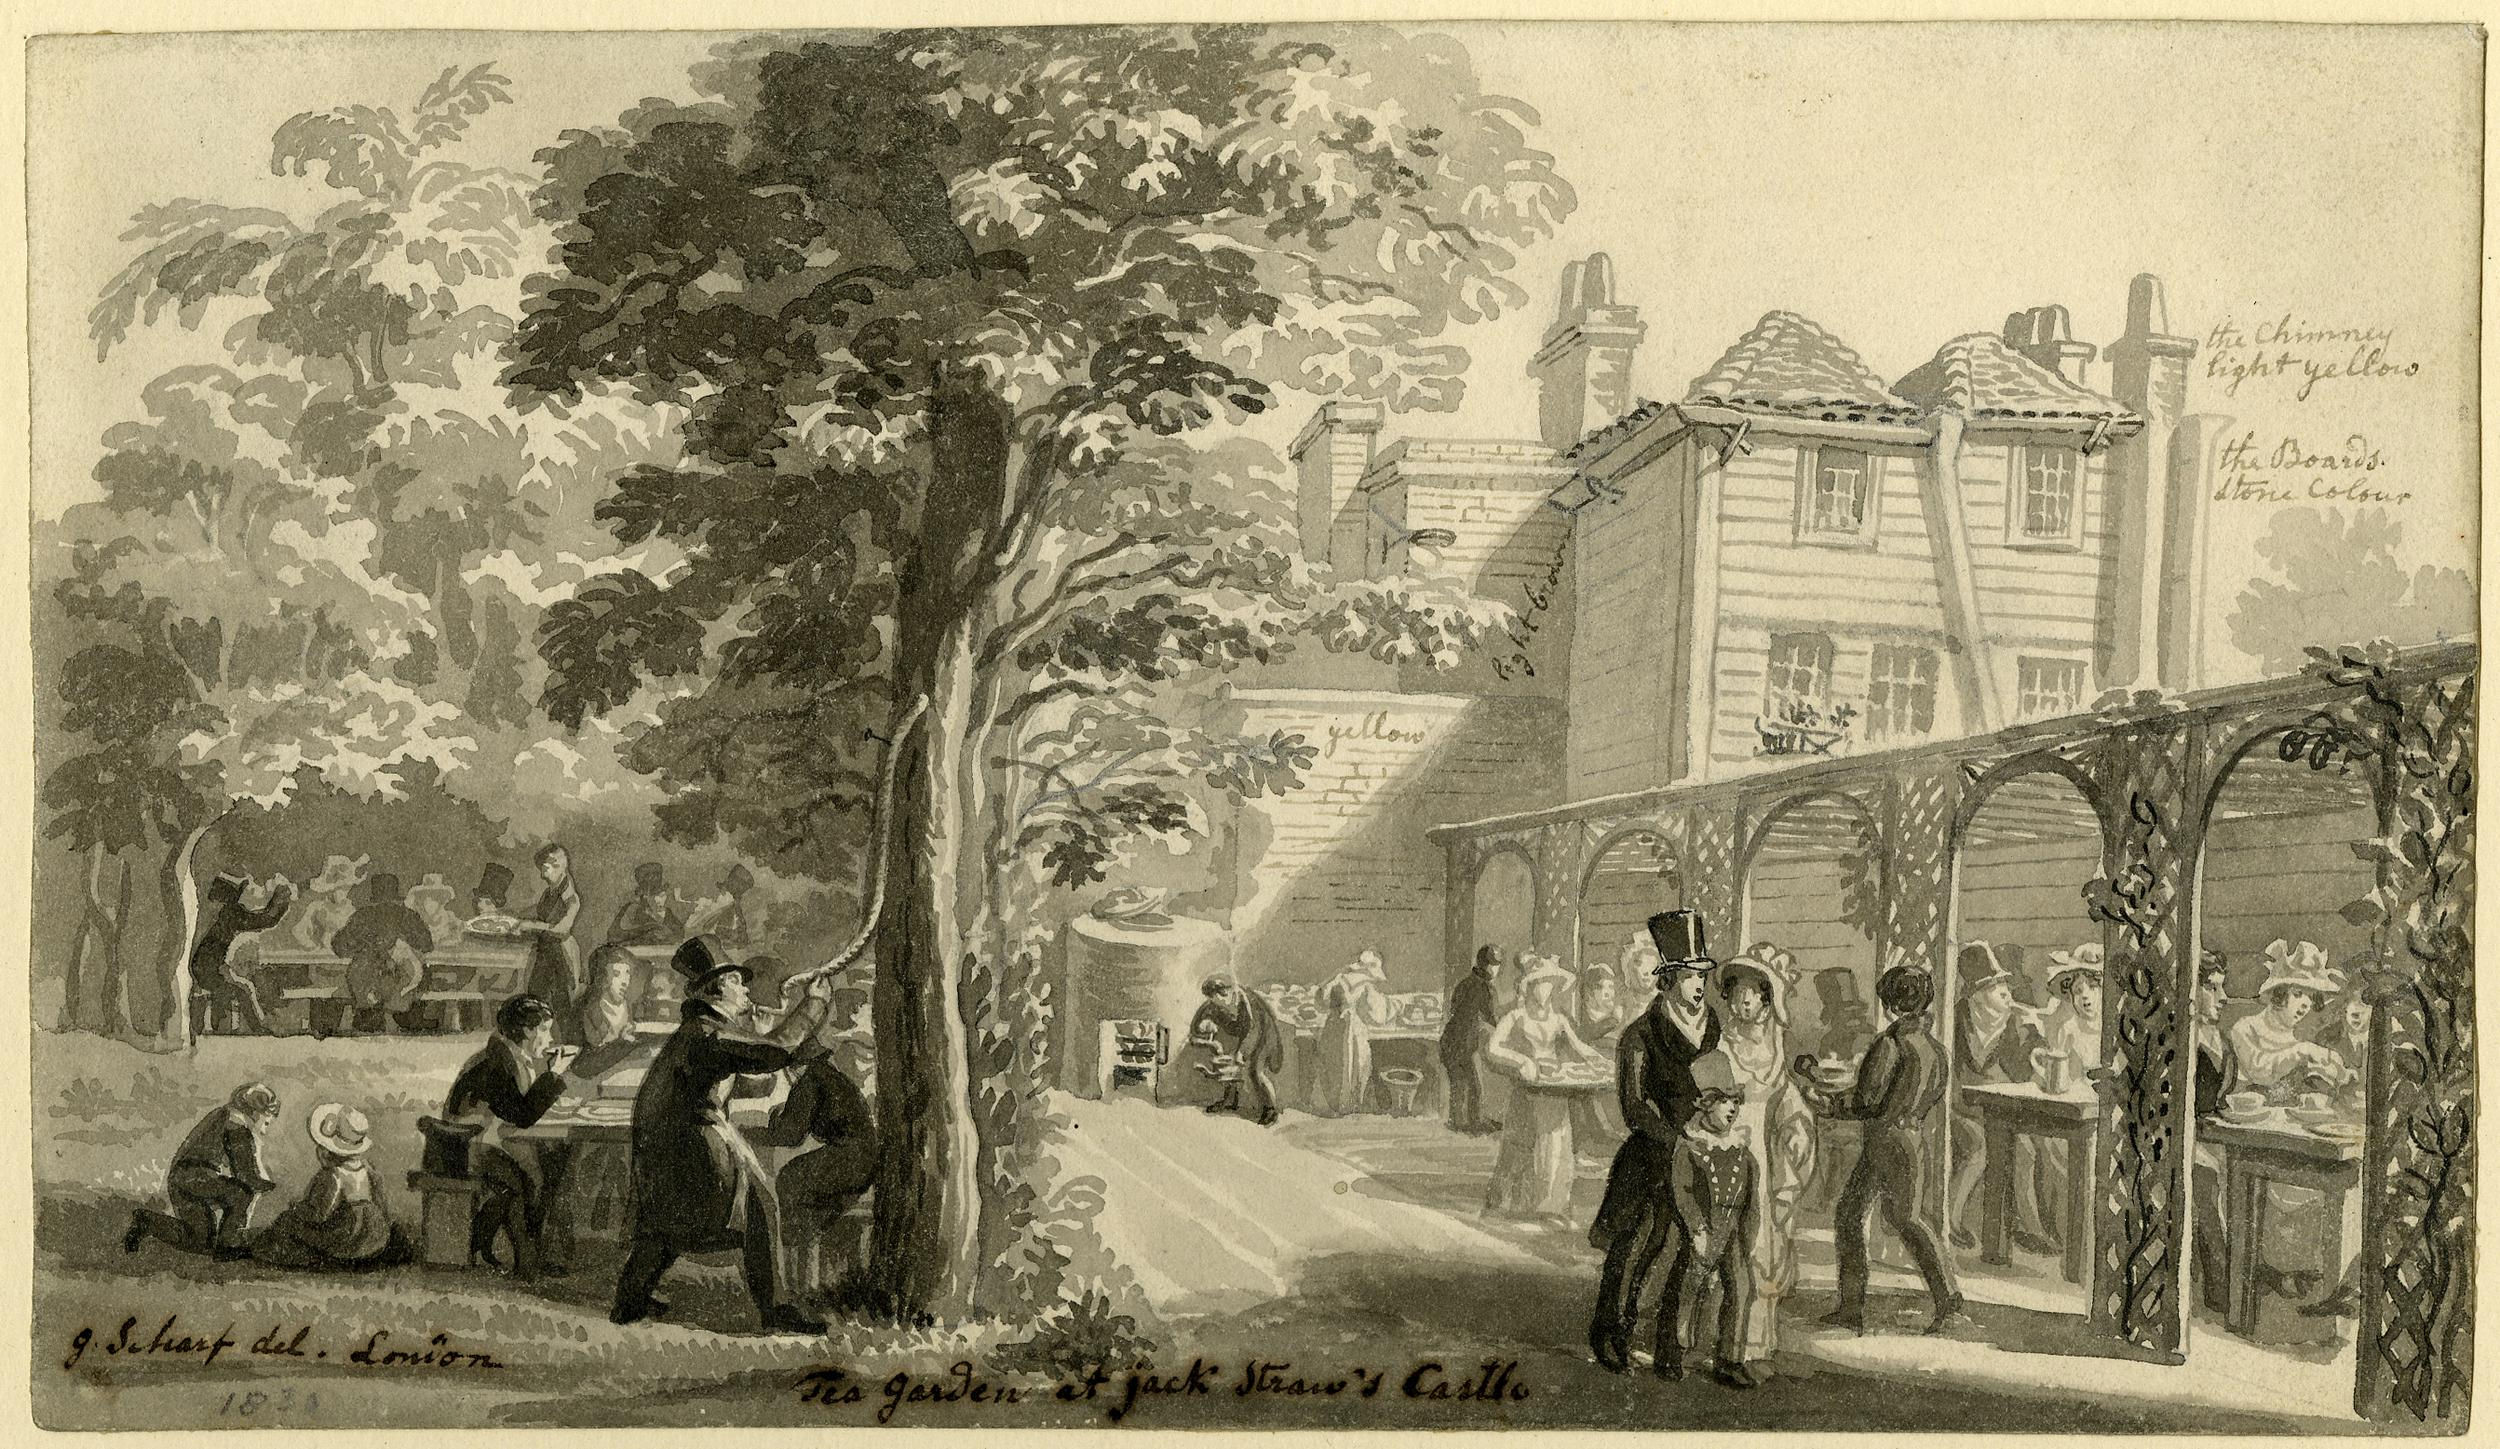 Black-and-white water color painting of many patrons enjoying tea in the gardens abutting a large house.